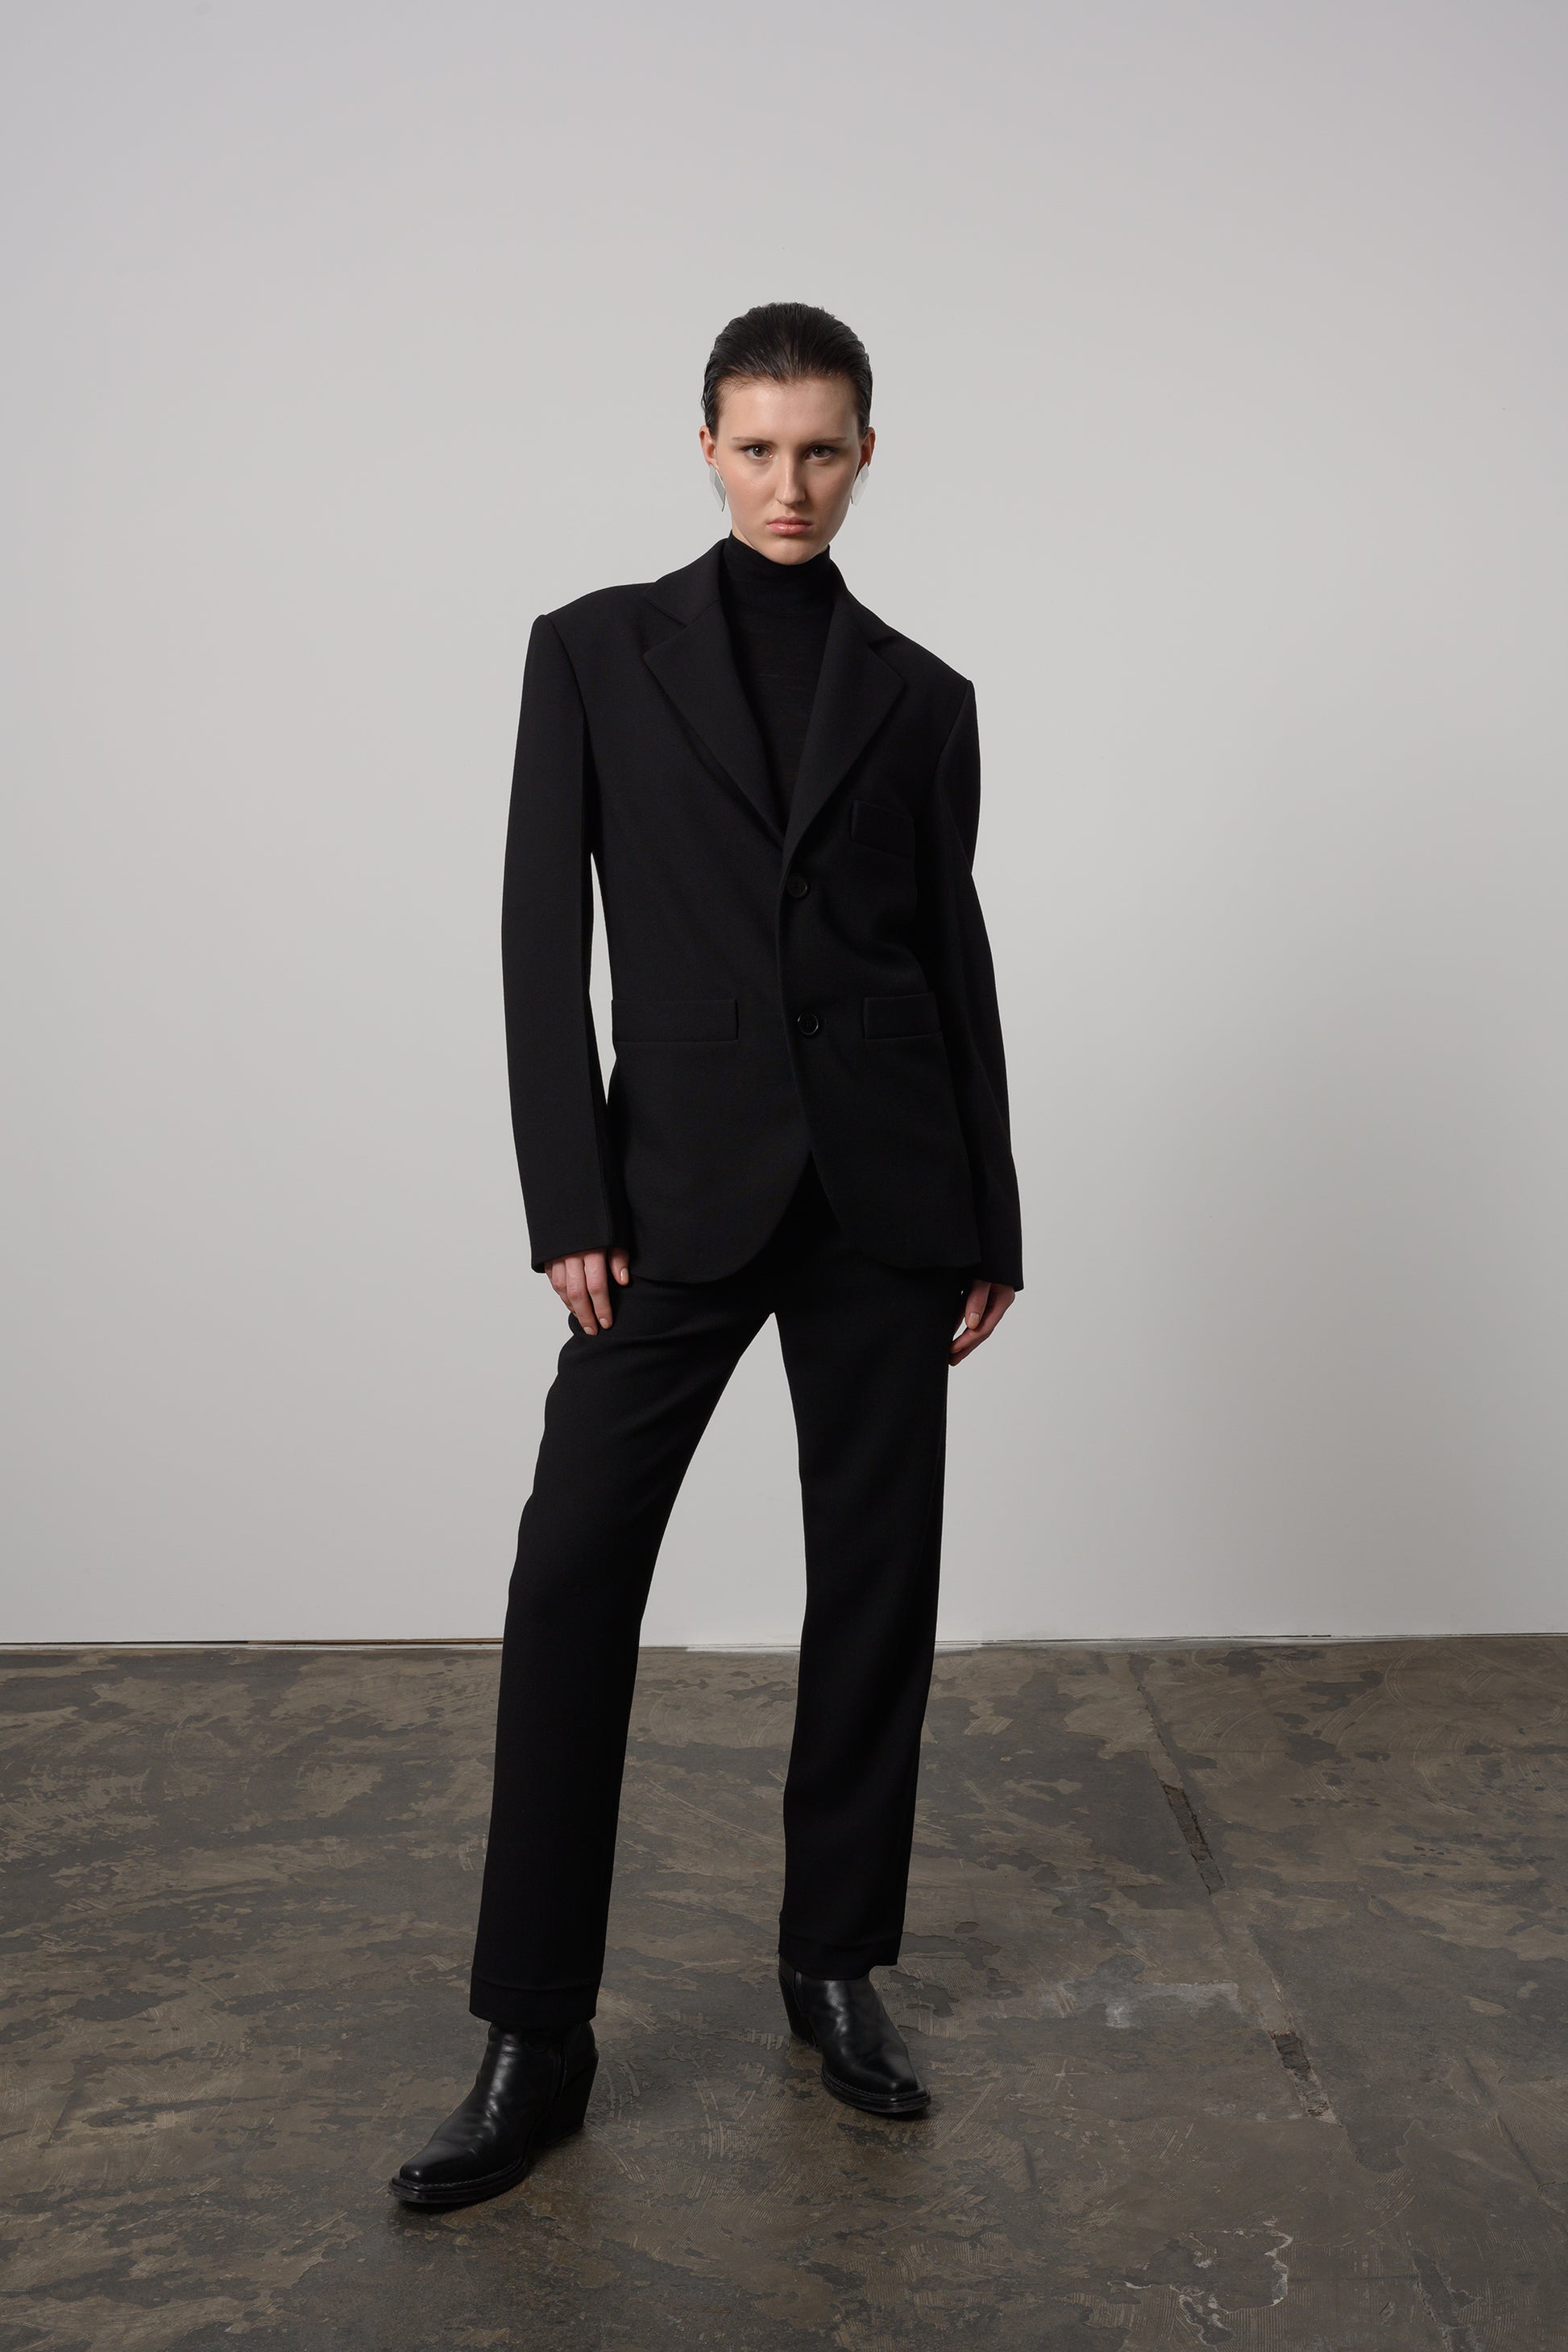 Model Zoe wearing stylish black egg-shape pants made of Italian wool gabardine, featuring a high waist and front pleats for a modern, sophisticated look